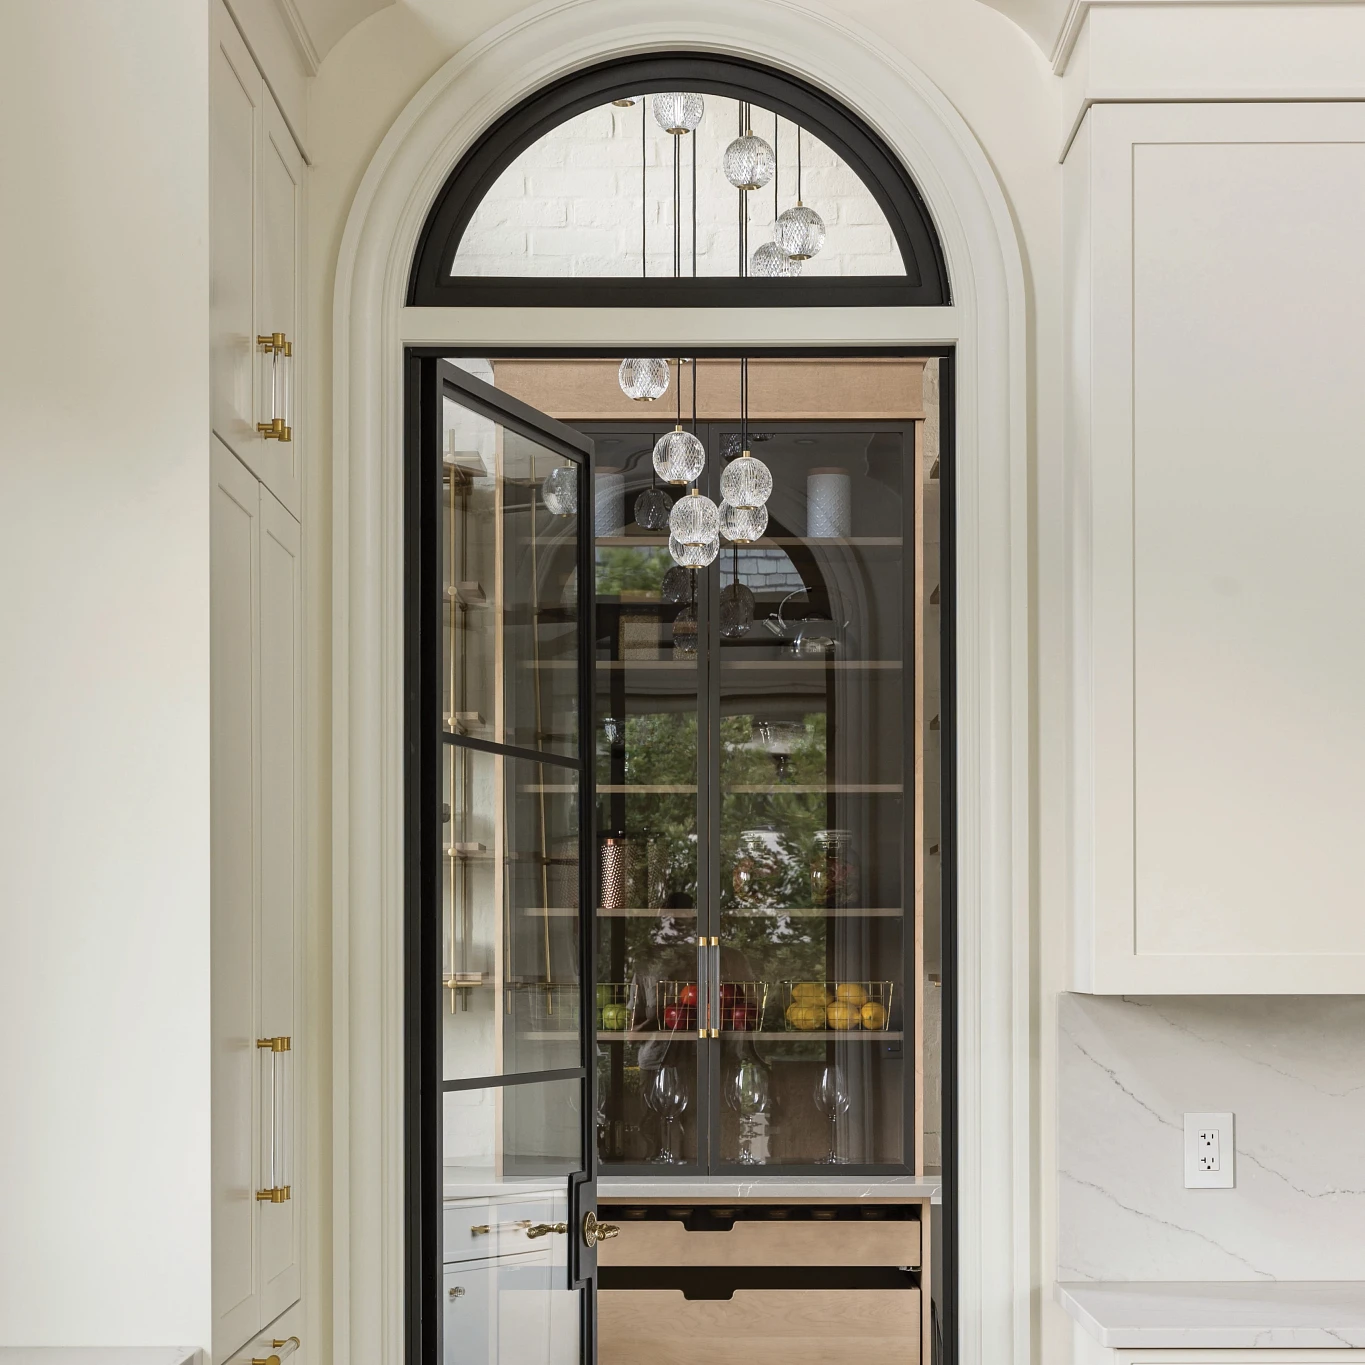 https://www.cambriausa.com/style/why-you-should-add-a-butlers-pantry-to-your-kitchen-design/